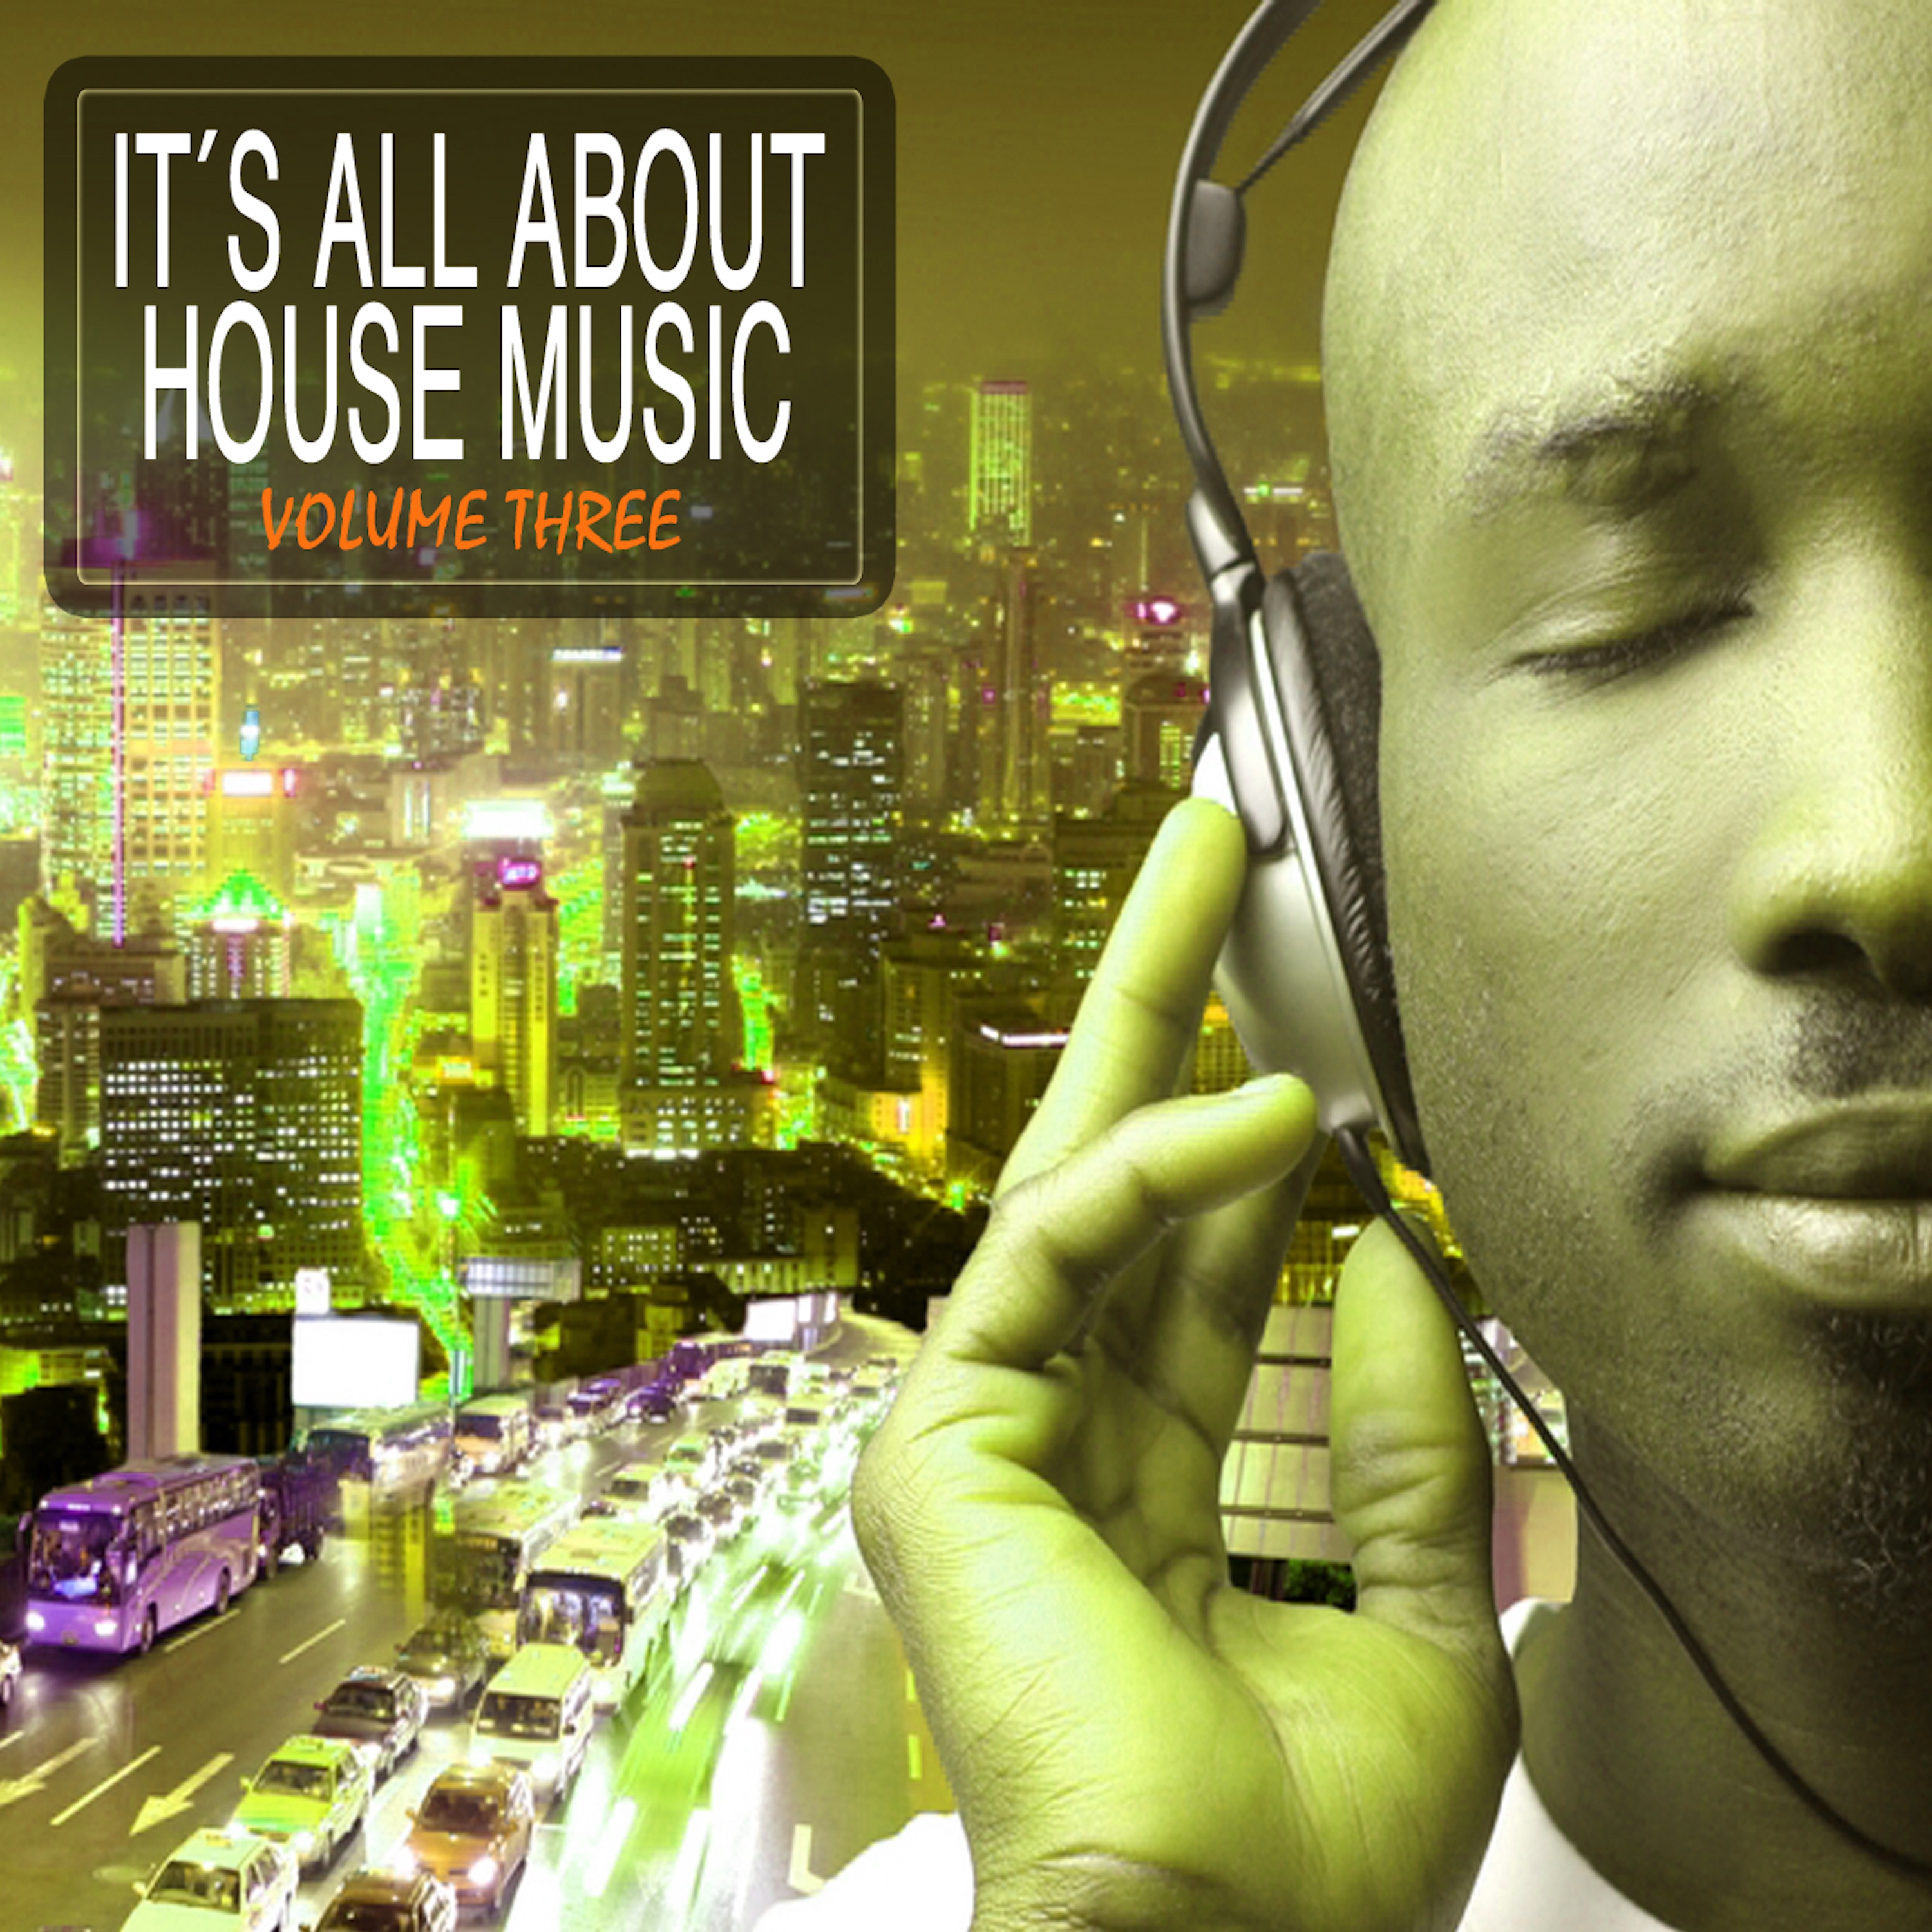 It's All About House Music Vol. 3